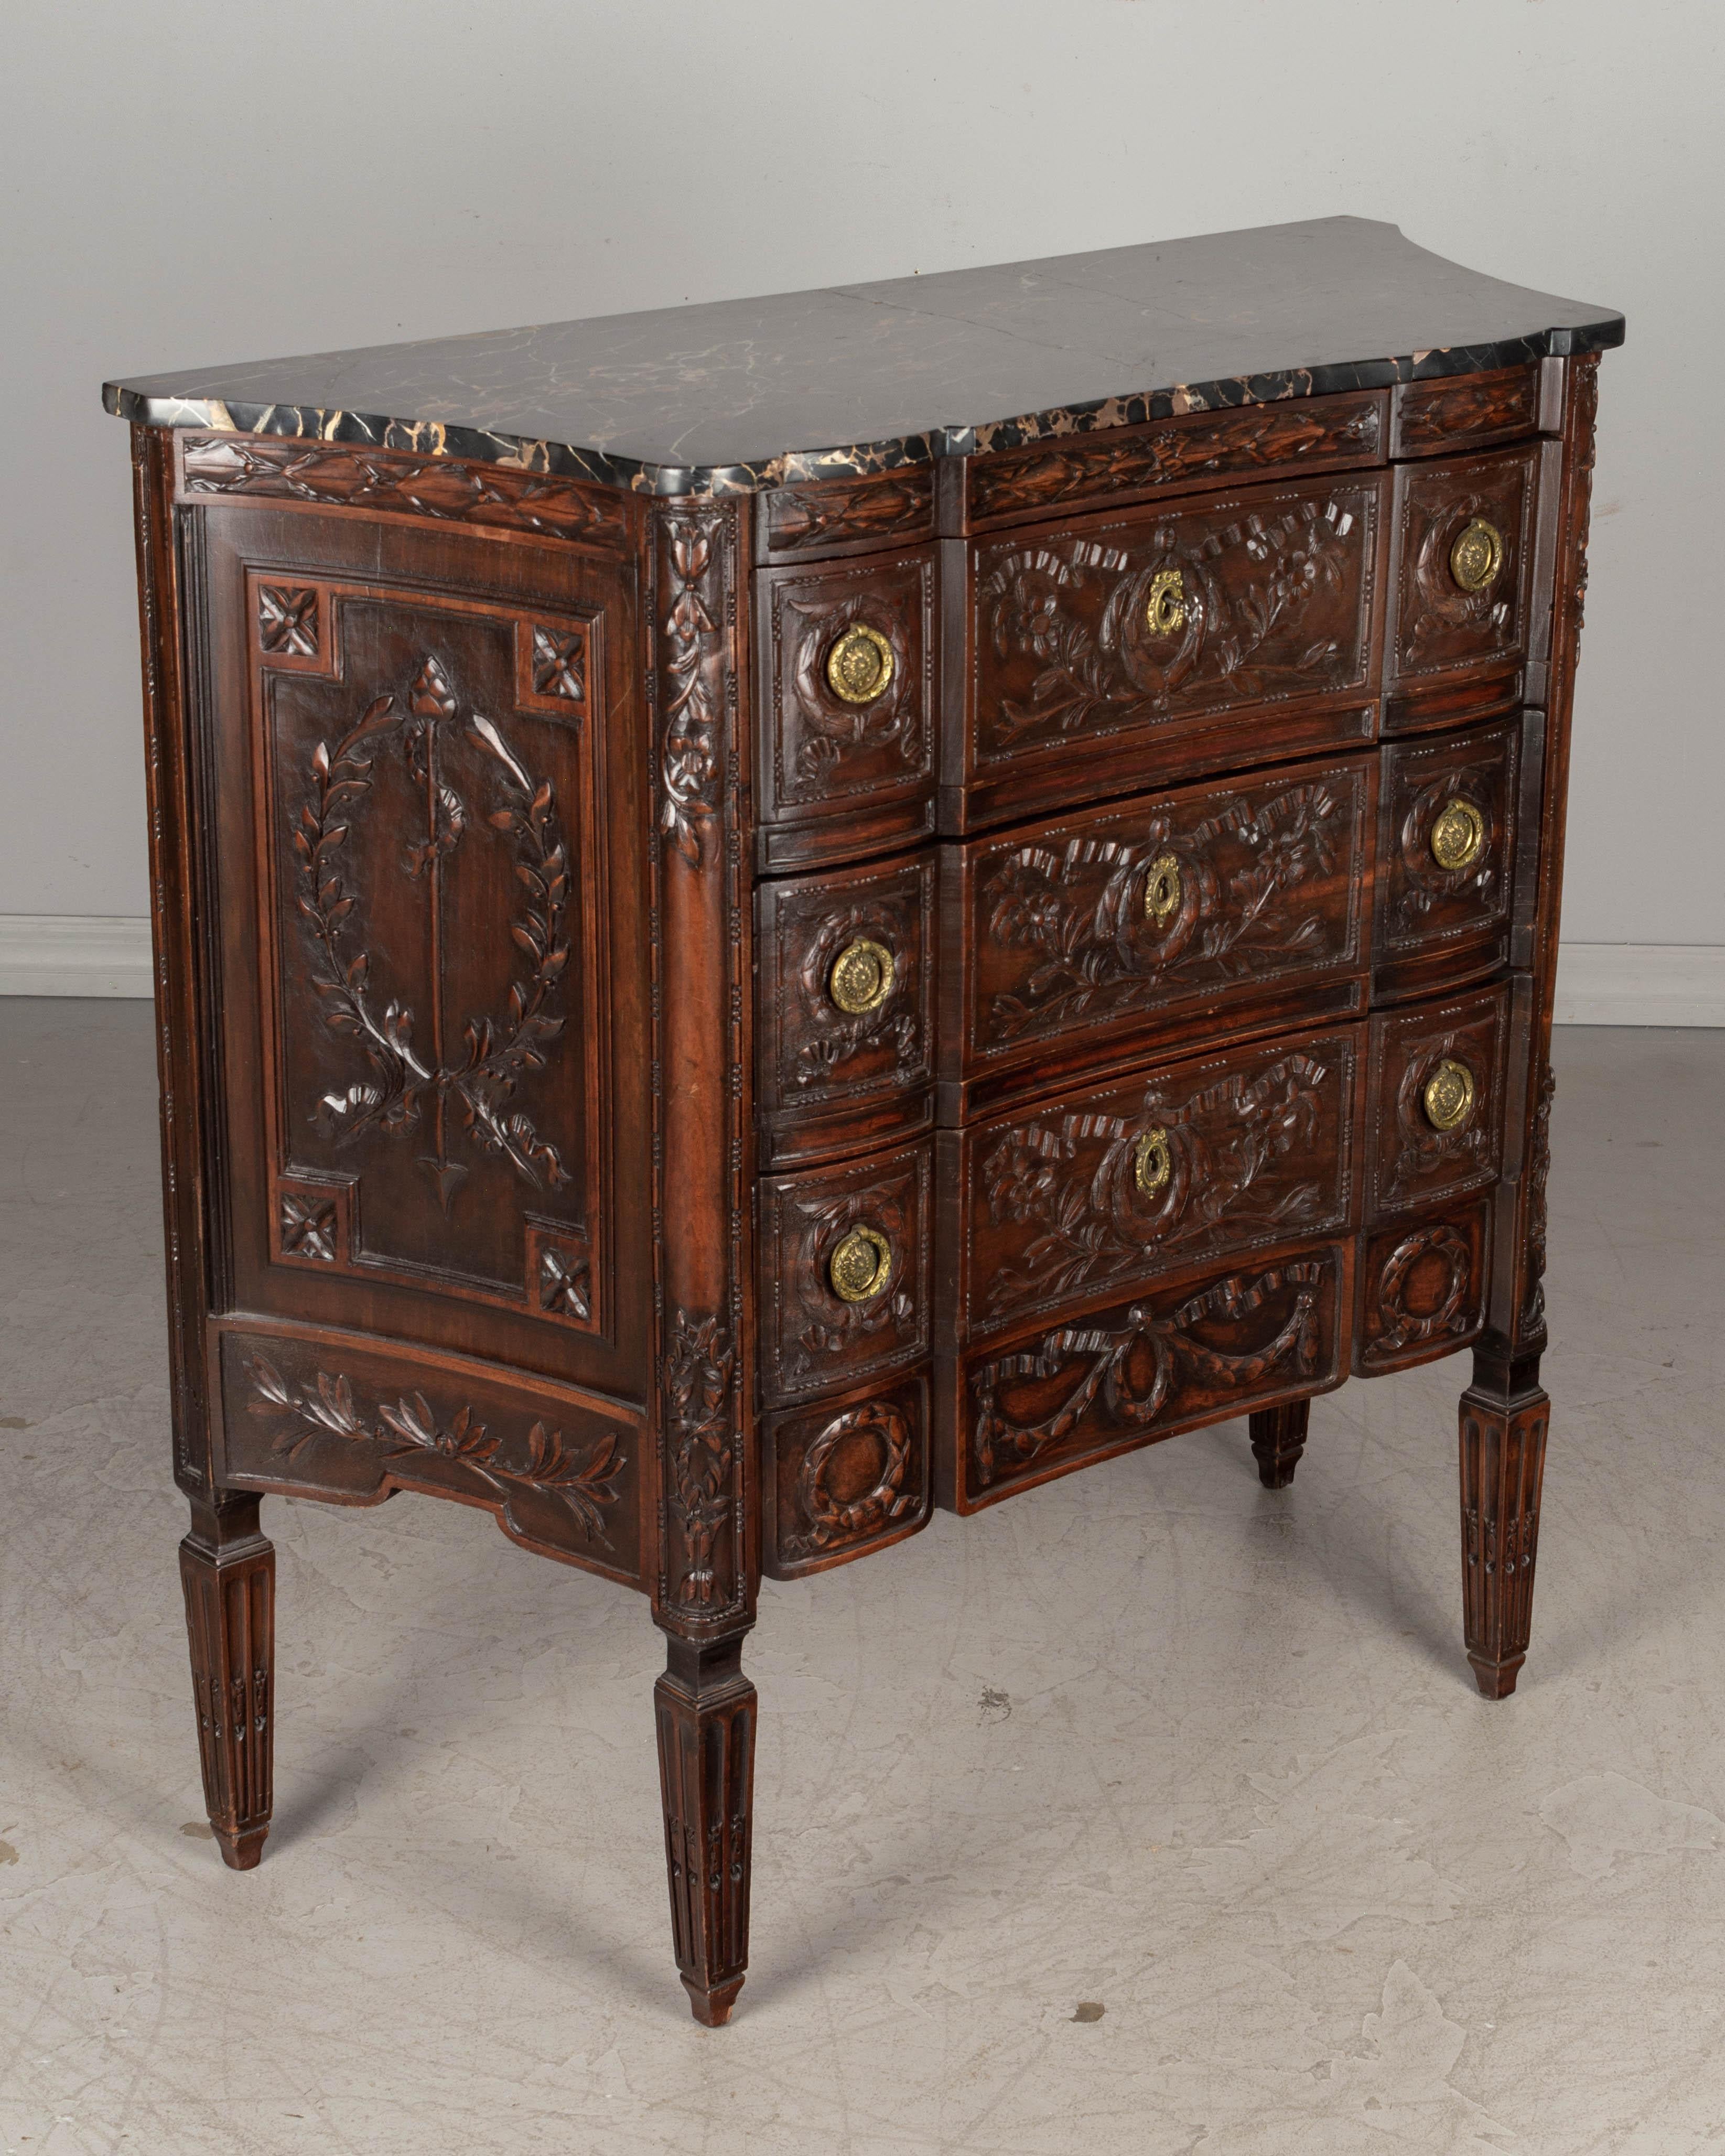 A Louis XVI style French marble top walnut commode with three dovetailed drawers and curved sides. Heavily carved decoration and original brass hardware with one key. Veined marble top has been repaired. Waxed patina. Please refer to photos for more